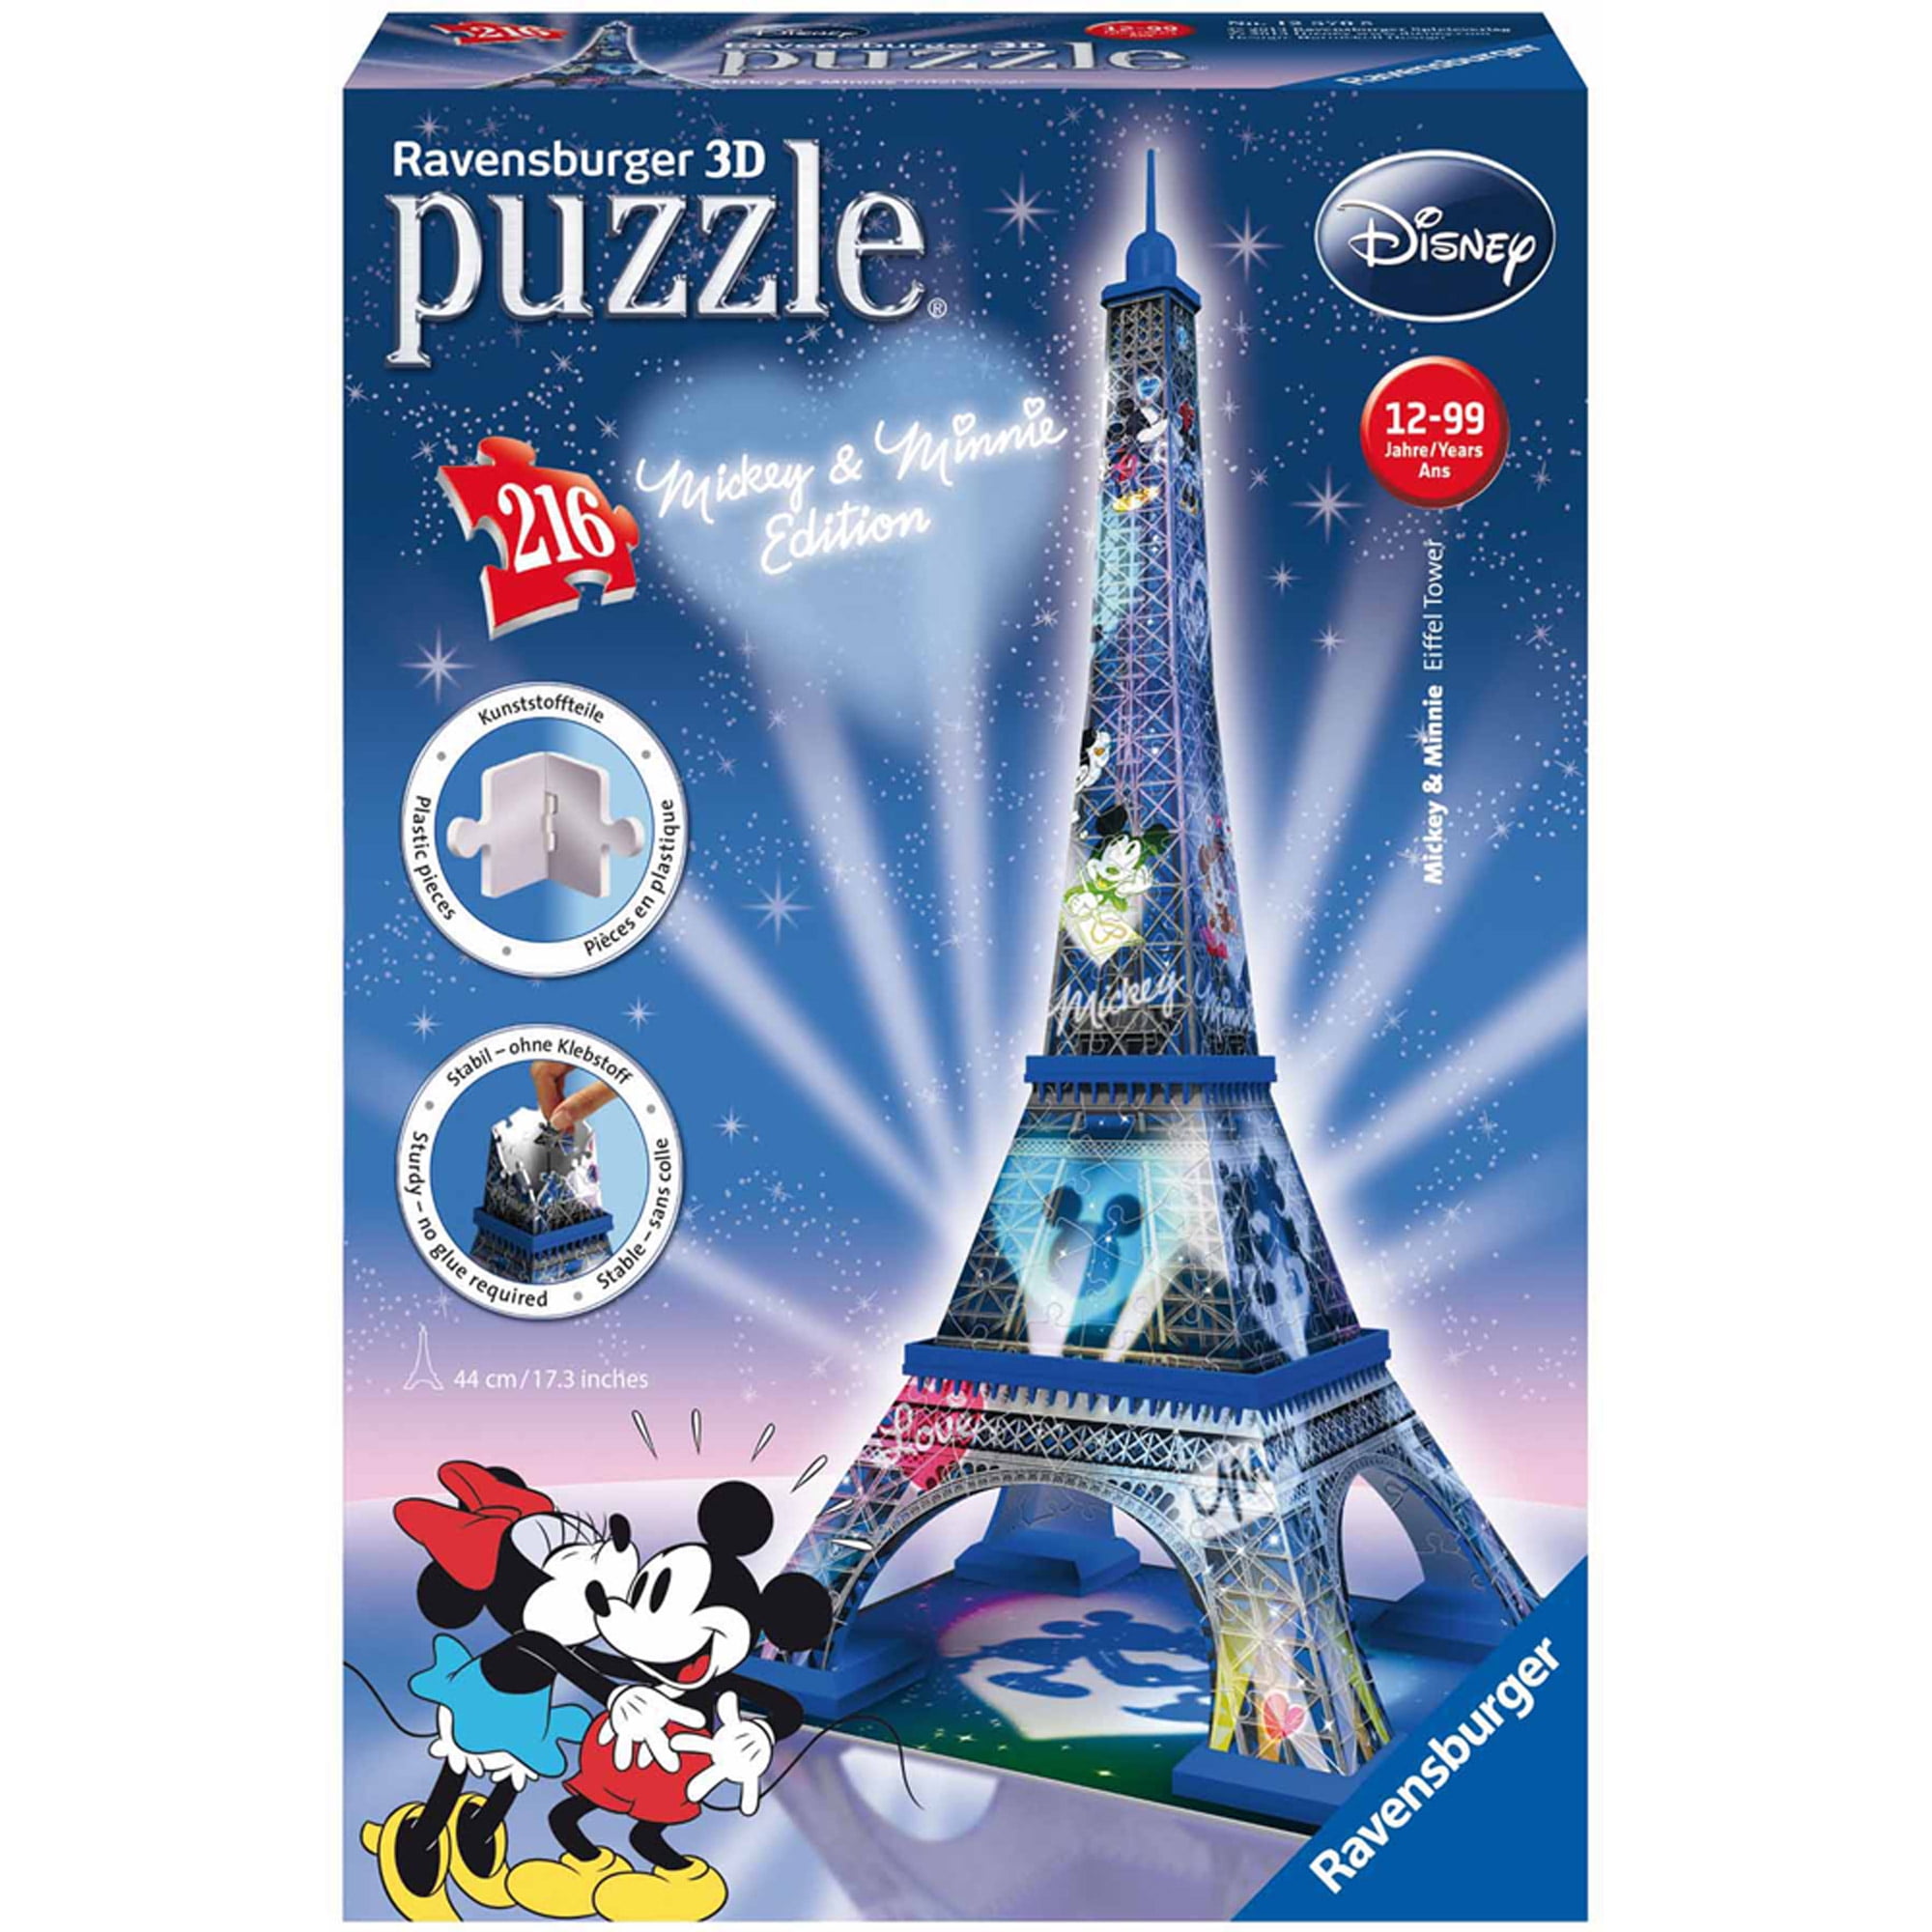 Ravensburger 12579-3D Puzzle Buildings with Light Eiffel Tower Paris - 216  Piece - Three-Dimensional Building Joy & No Glue Needed for Adults and